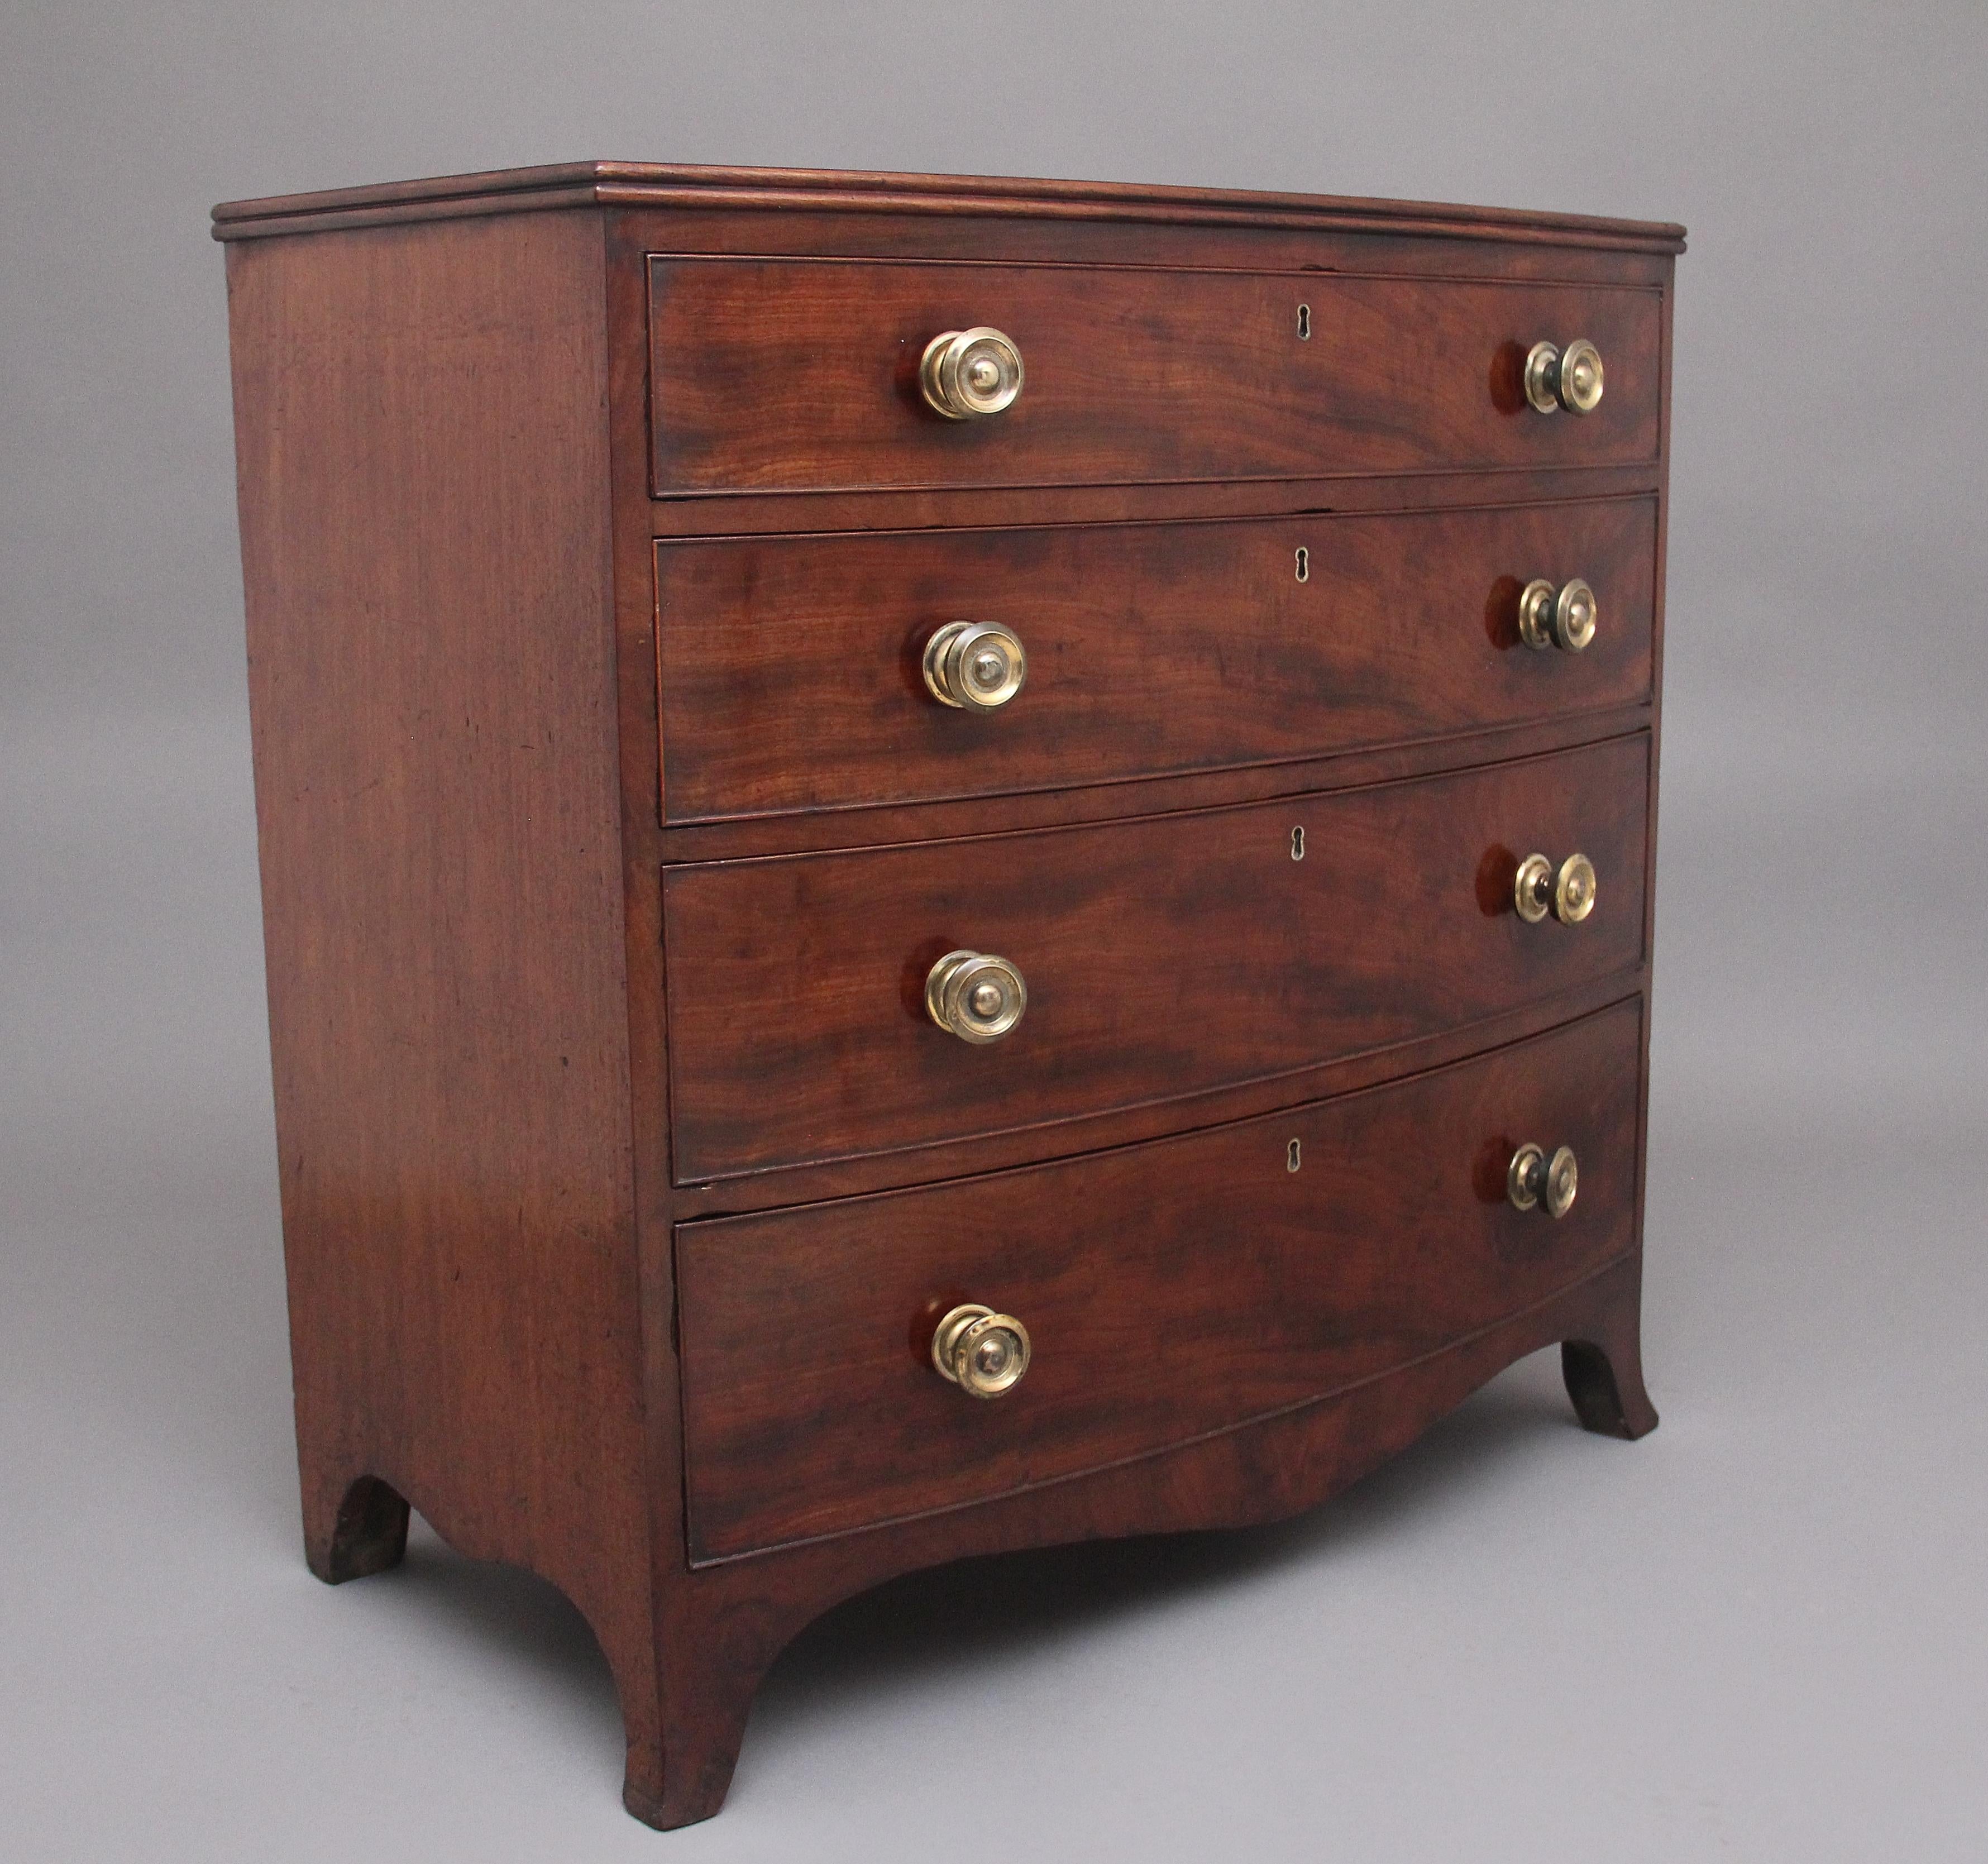 Early 19th Century mahogany bowfront chest of drawers of nice proportions, having a lovely figured top above four graduated oak lined drawers with the original turned brass handles, shaped apron and supported on splay feet.  Circa 1800.
